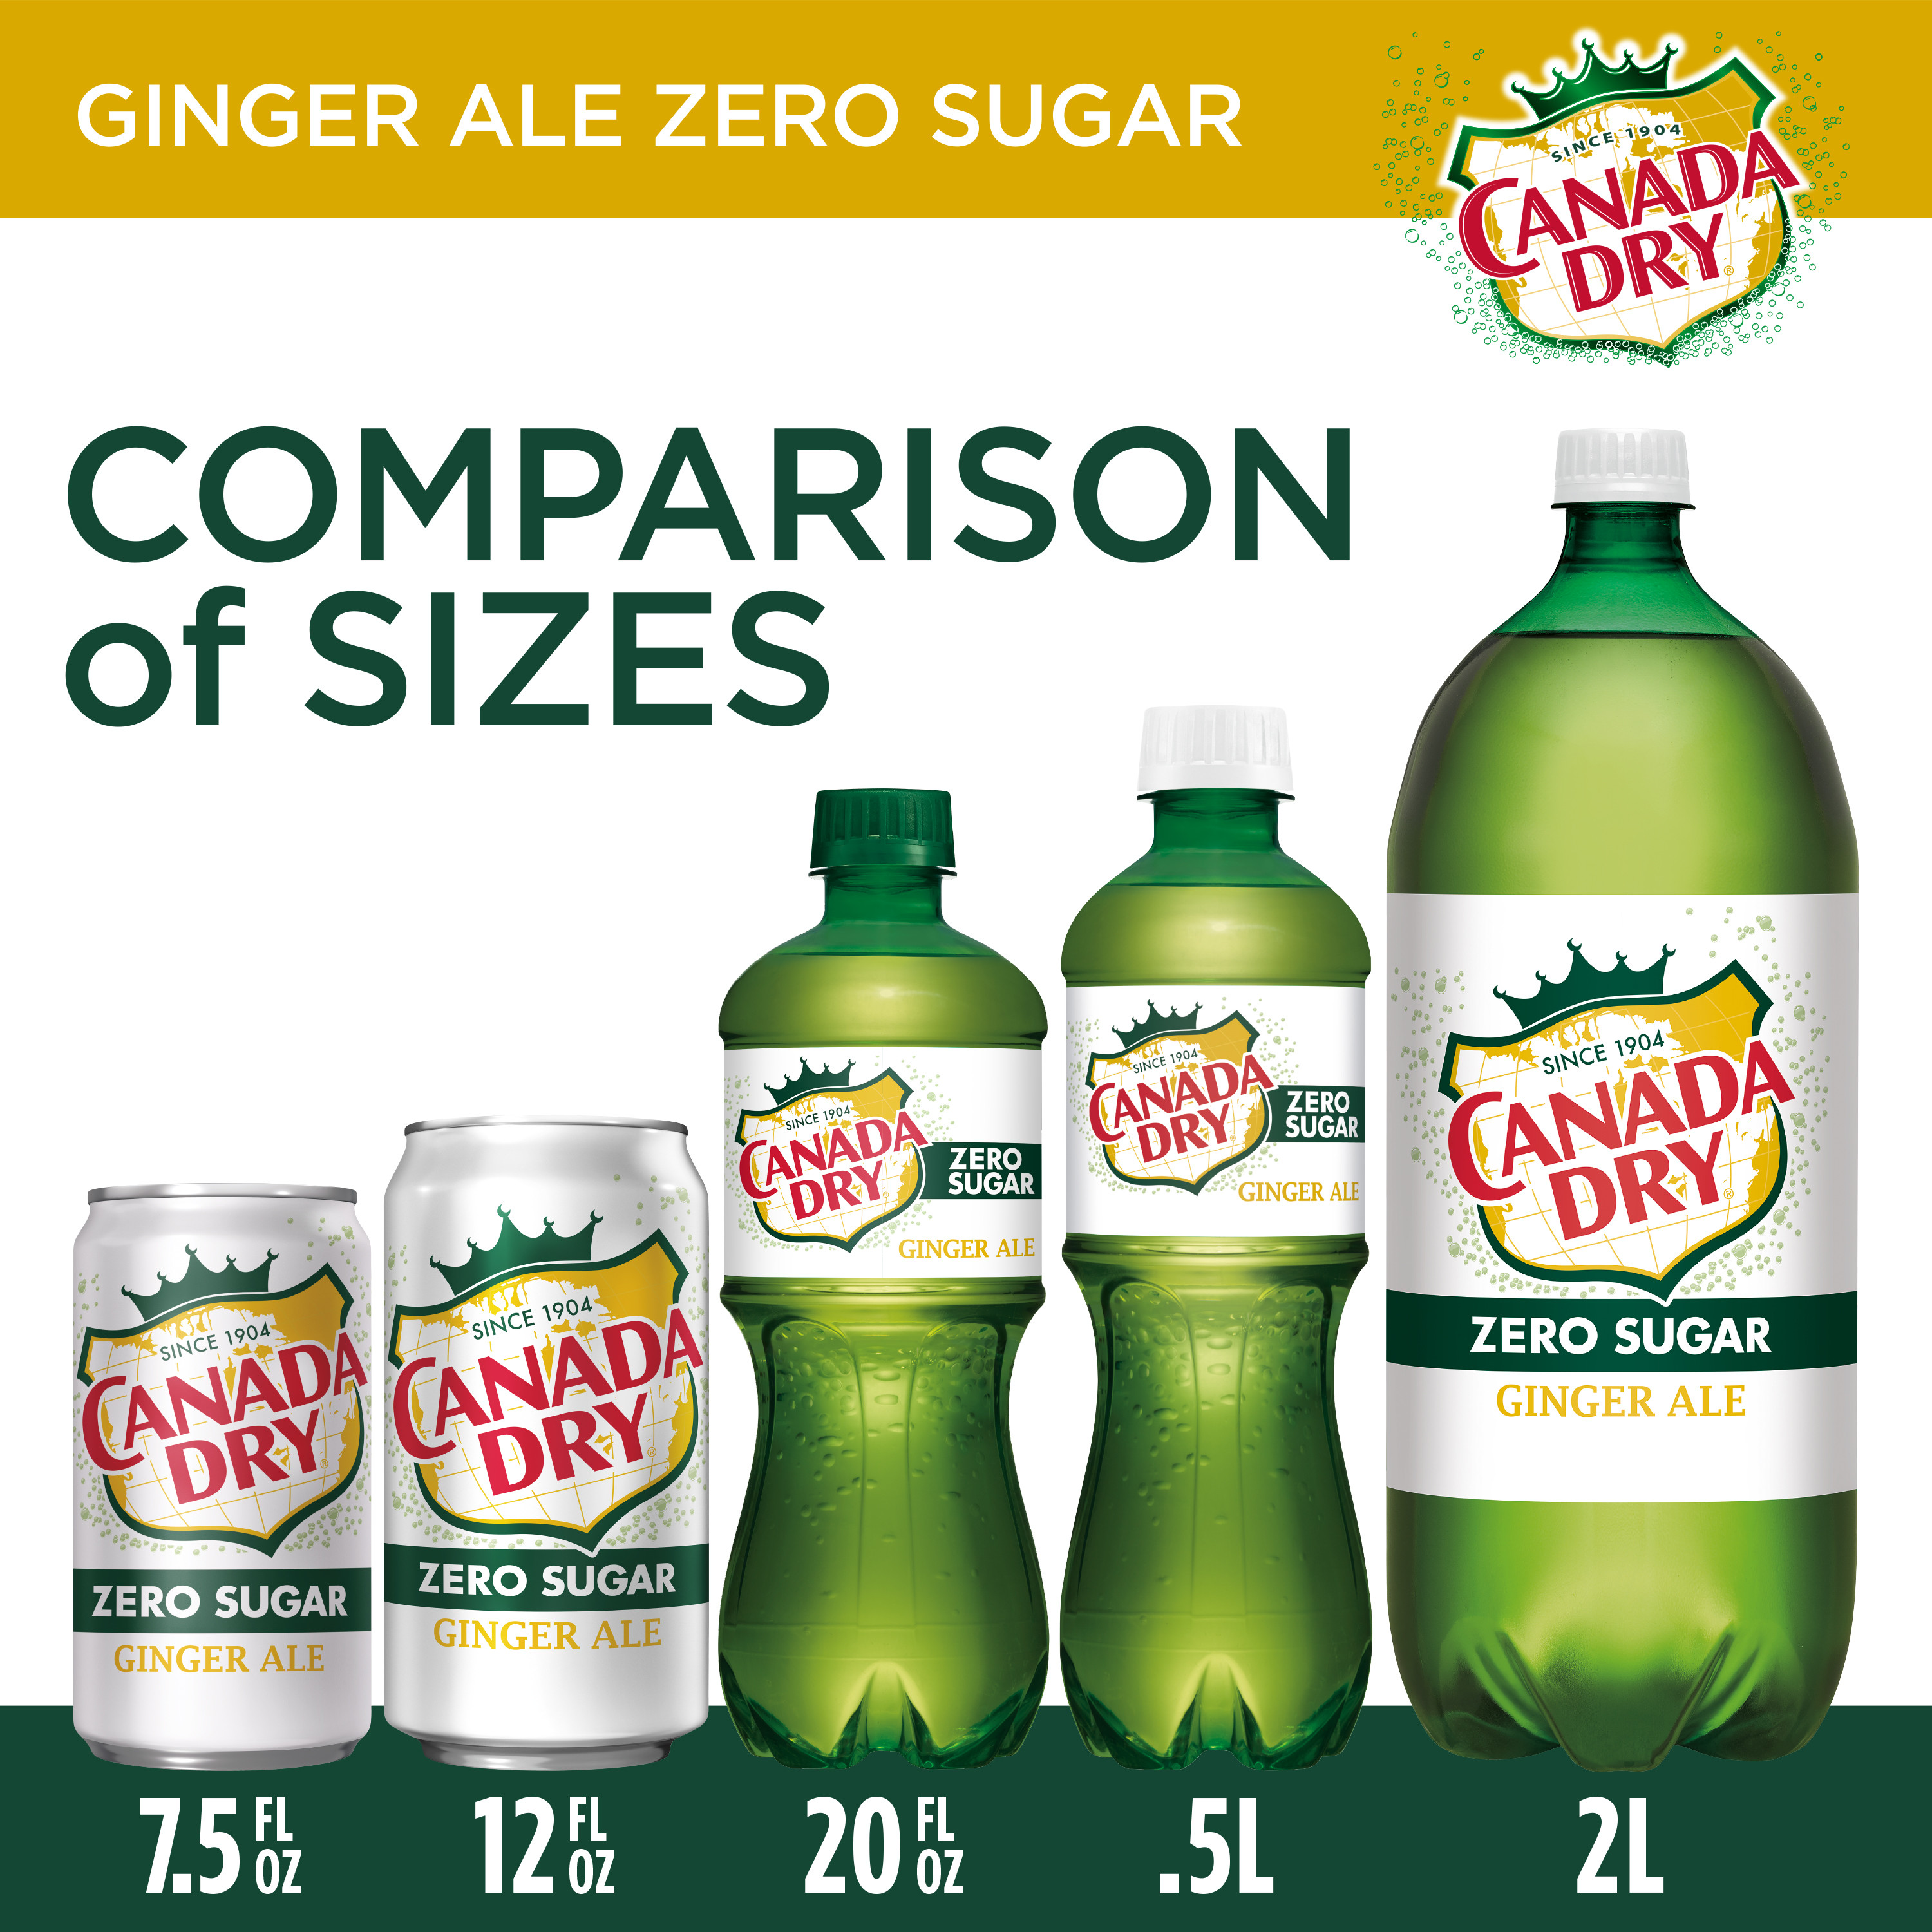 Canada Dry Zero Sugar Ginger Ale Soda Pop, 12 fl oz, 12 Pack Cans - image 3 of 13